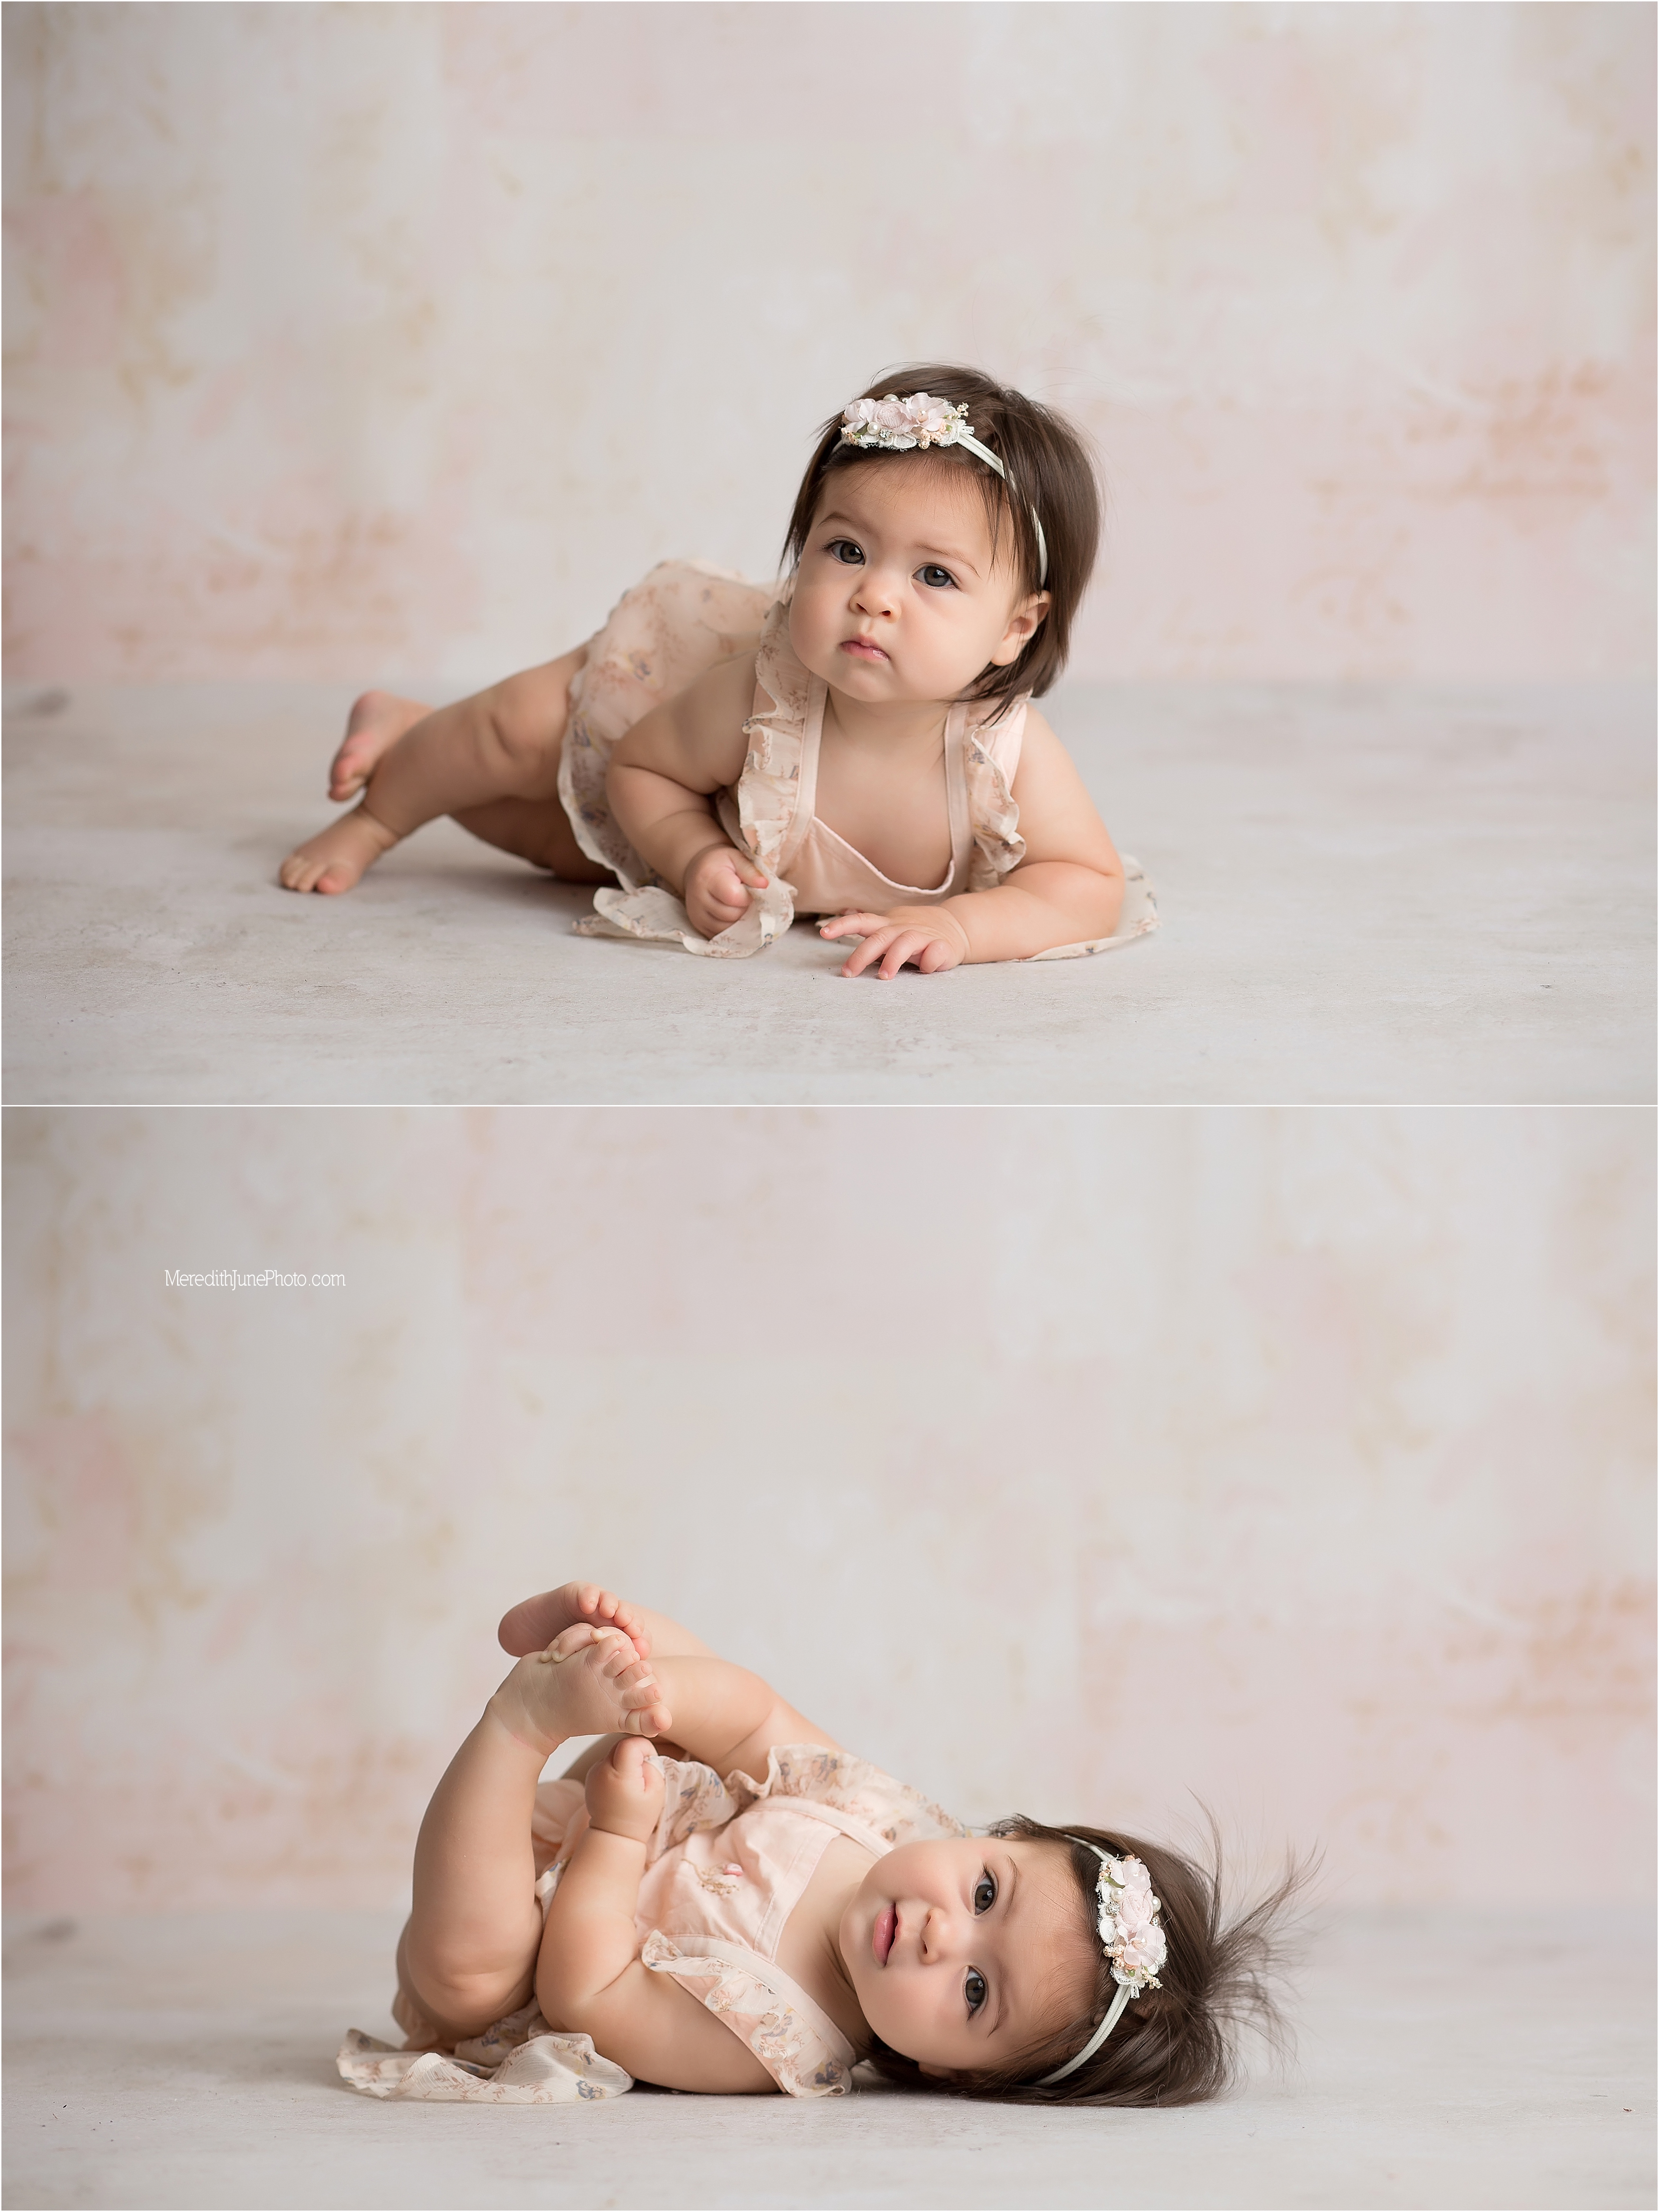 Baby girl Evelyn's sitter session in Meredith June Photography studio